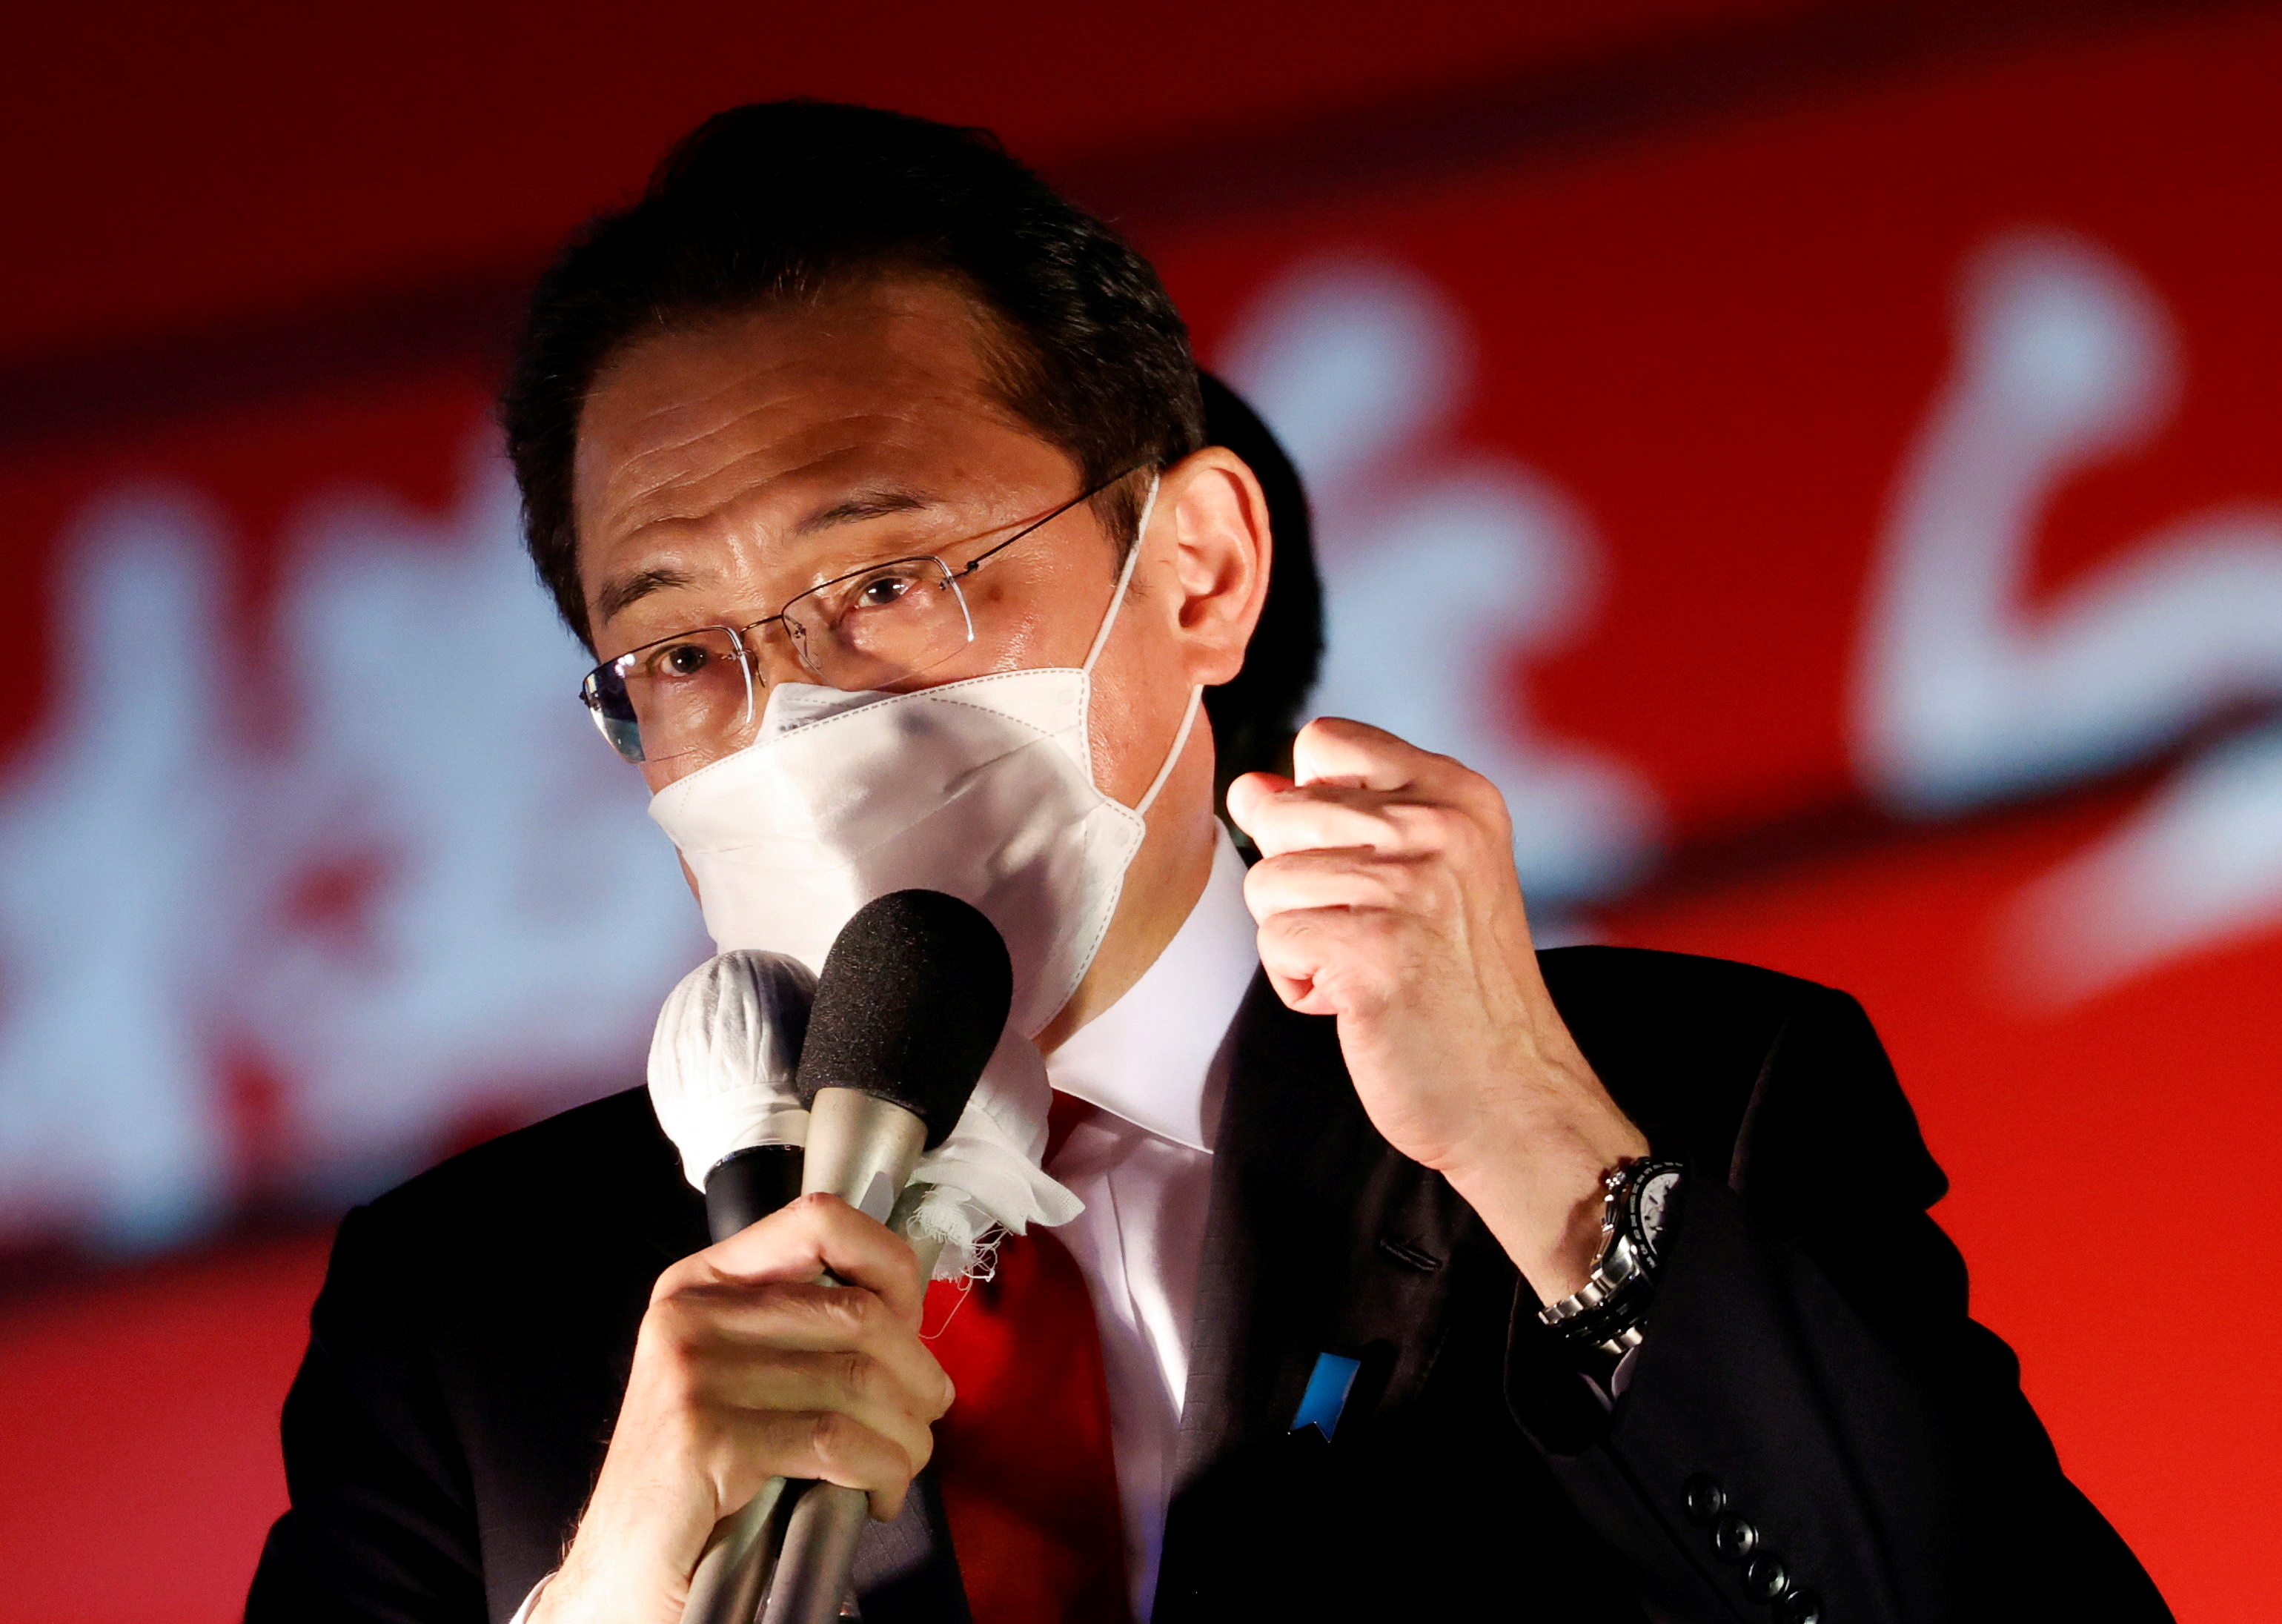 Japan's Prime Minister Fumio Kishida, who is also the President of the ruling Liberal Democratic Party, delivers a speech to voters from atop the campaigning bus on the last day of campaigning for the October 31 lower house election, amid the coronavirus disease (COVID-19) pandemic, in Tokyo, Japan October 30, 2021. REUTERS/Issei Kato/File Photo